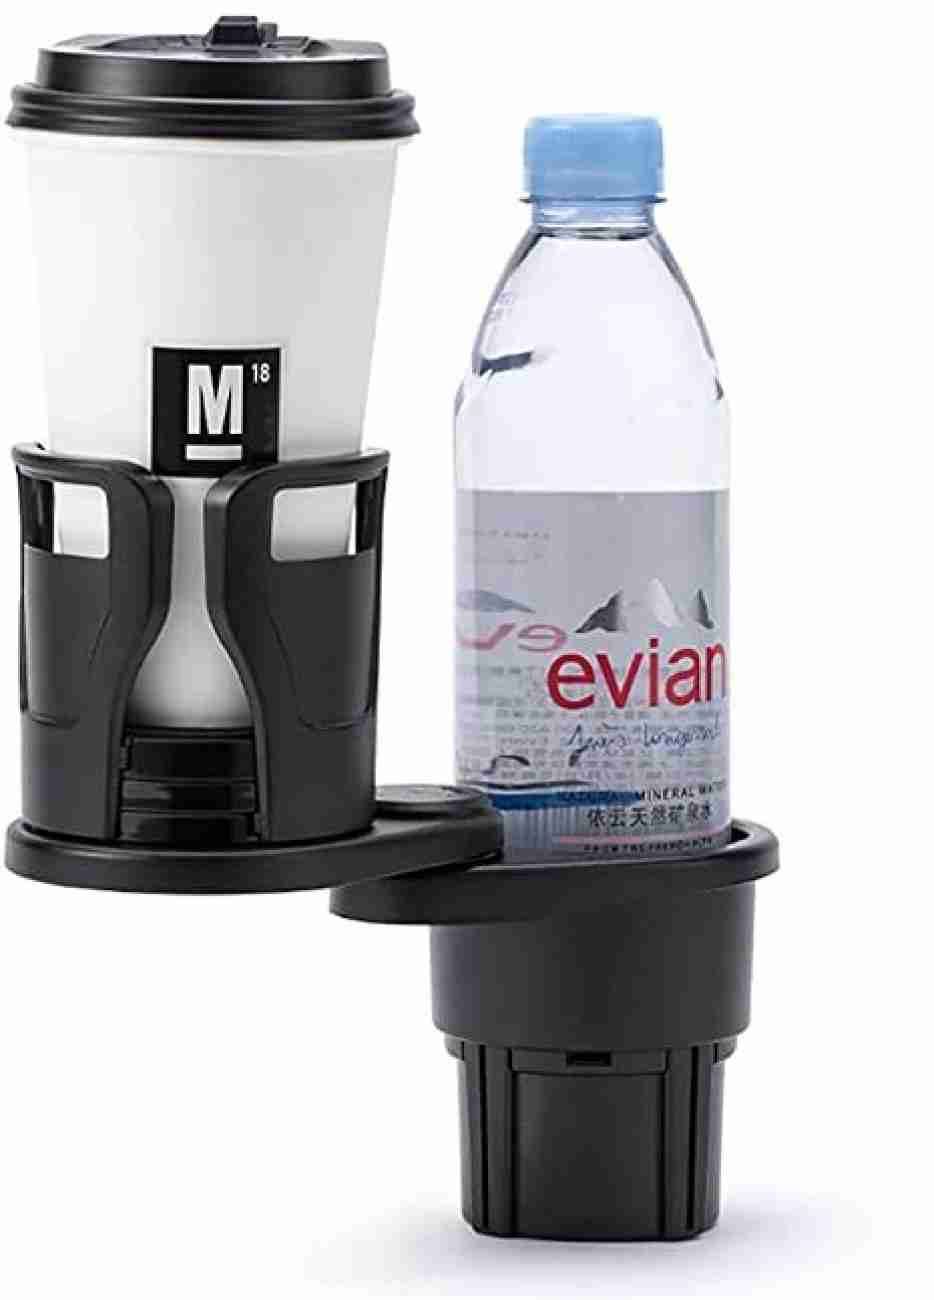 Rhydon Cup Holder Expander for Car, Vehicle Mounted Water Cup Drink Holder, Car Laptop Holder Price in India - Buy Rhydon Cup Holder Expander for Car